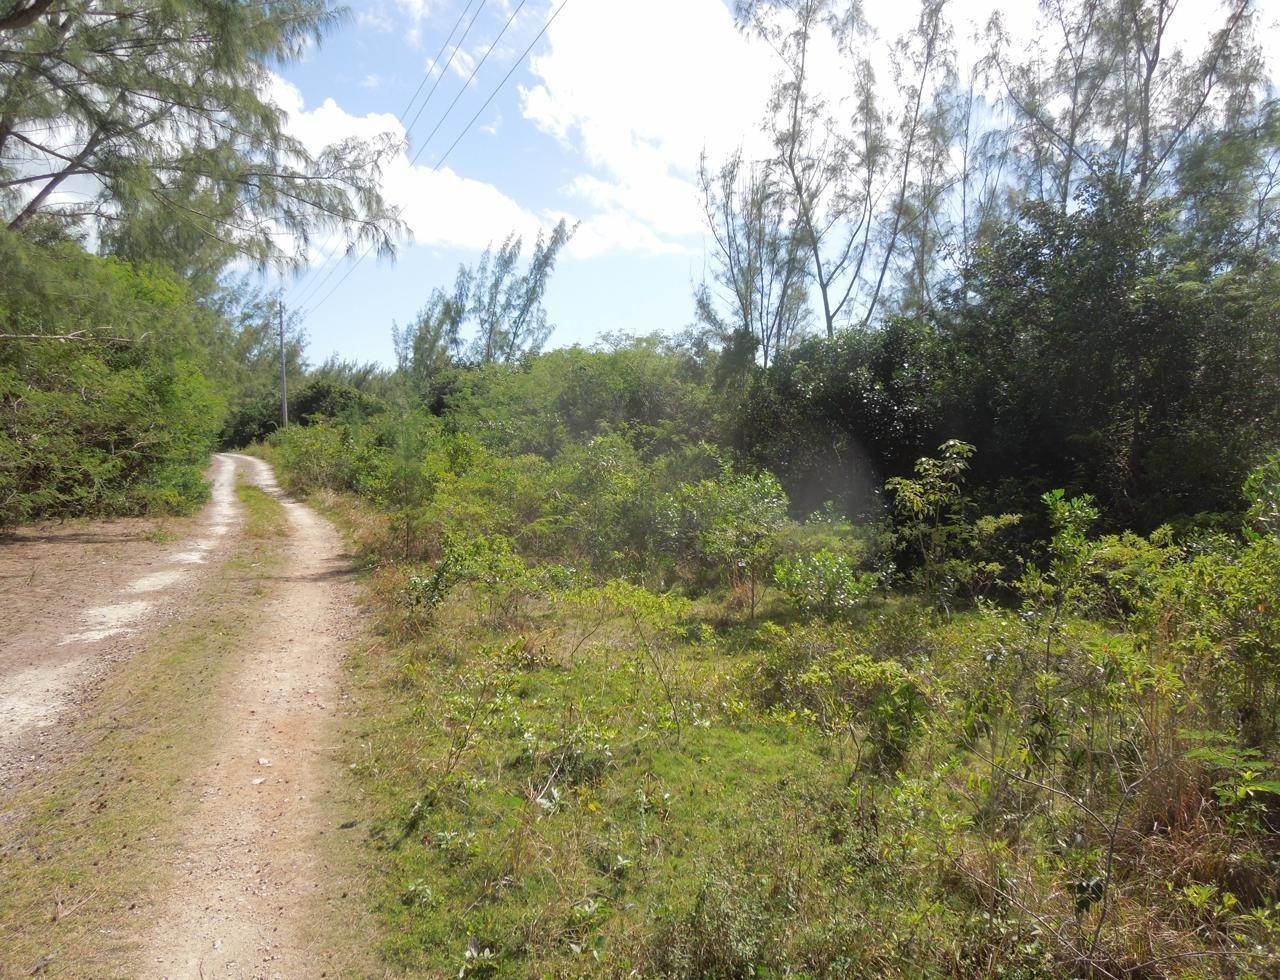 6. Lots / Acreage for Sale at Whale Point, Eleuthera, Bahamas